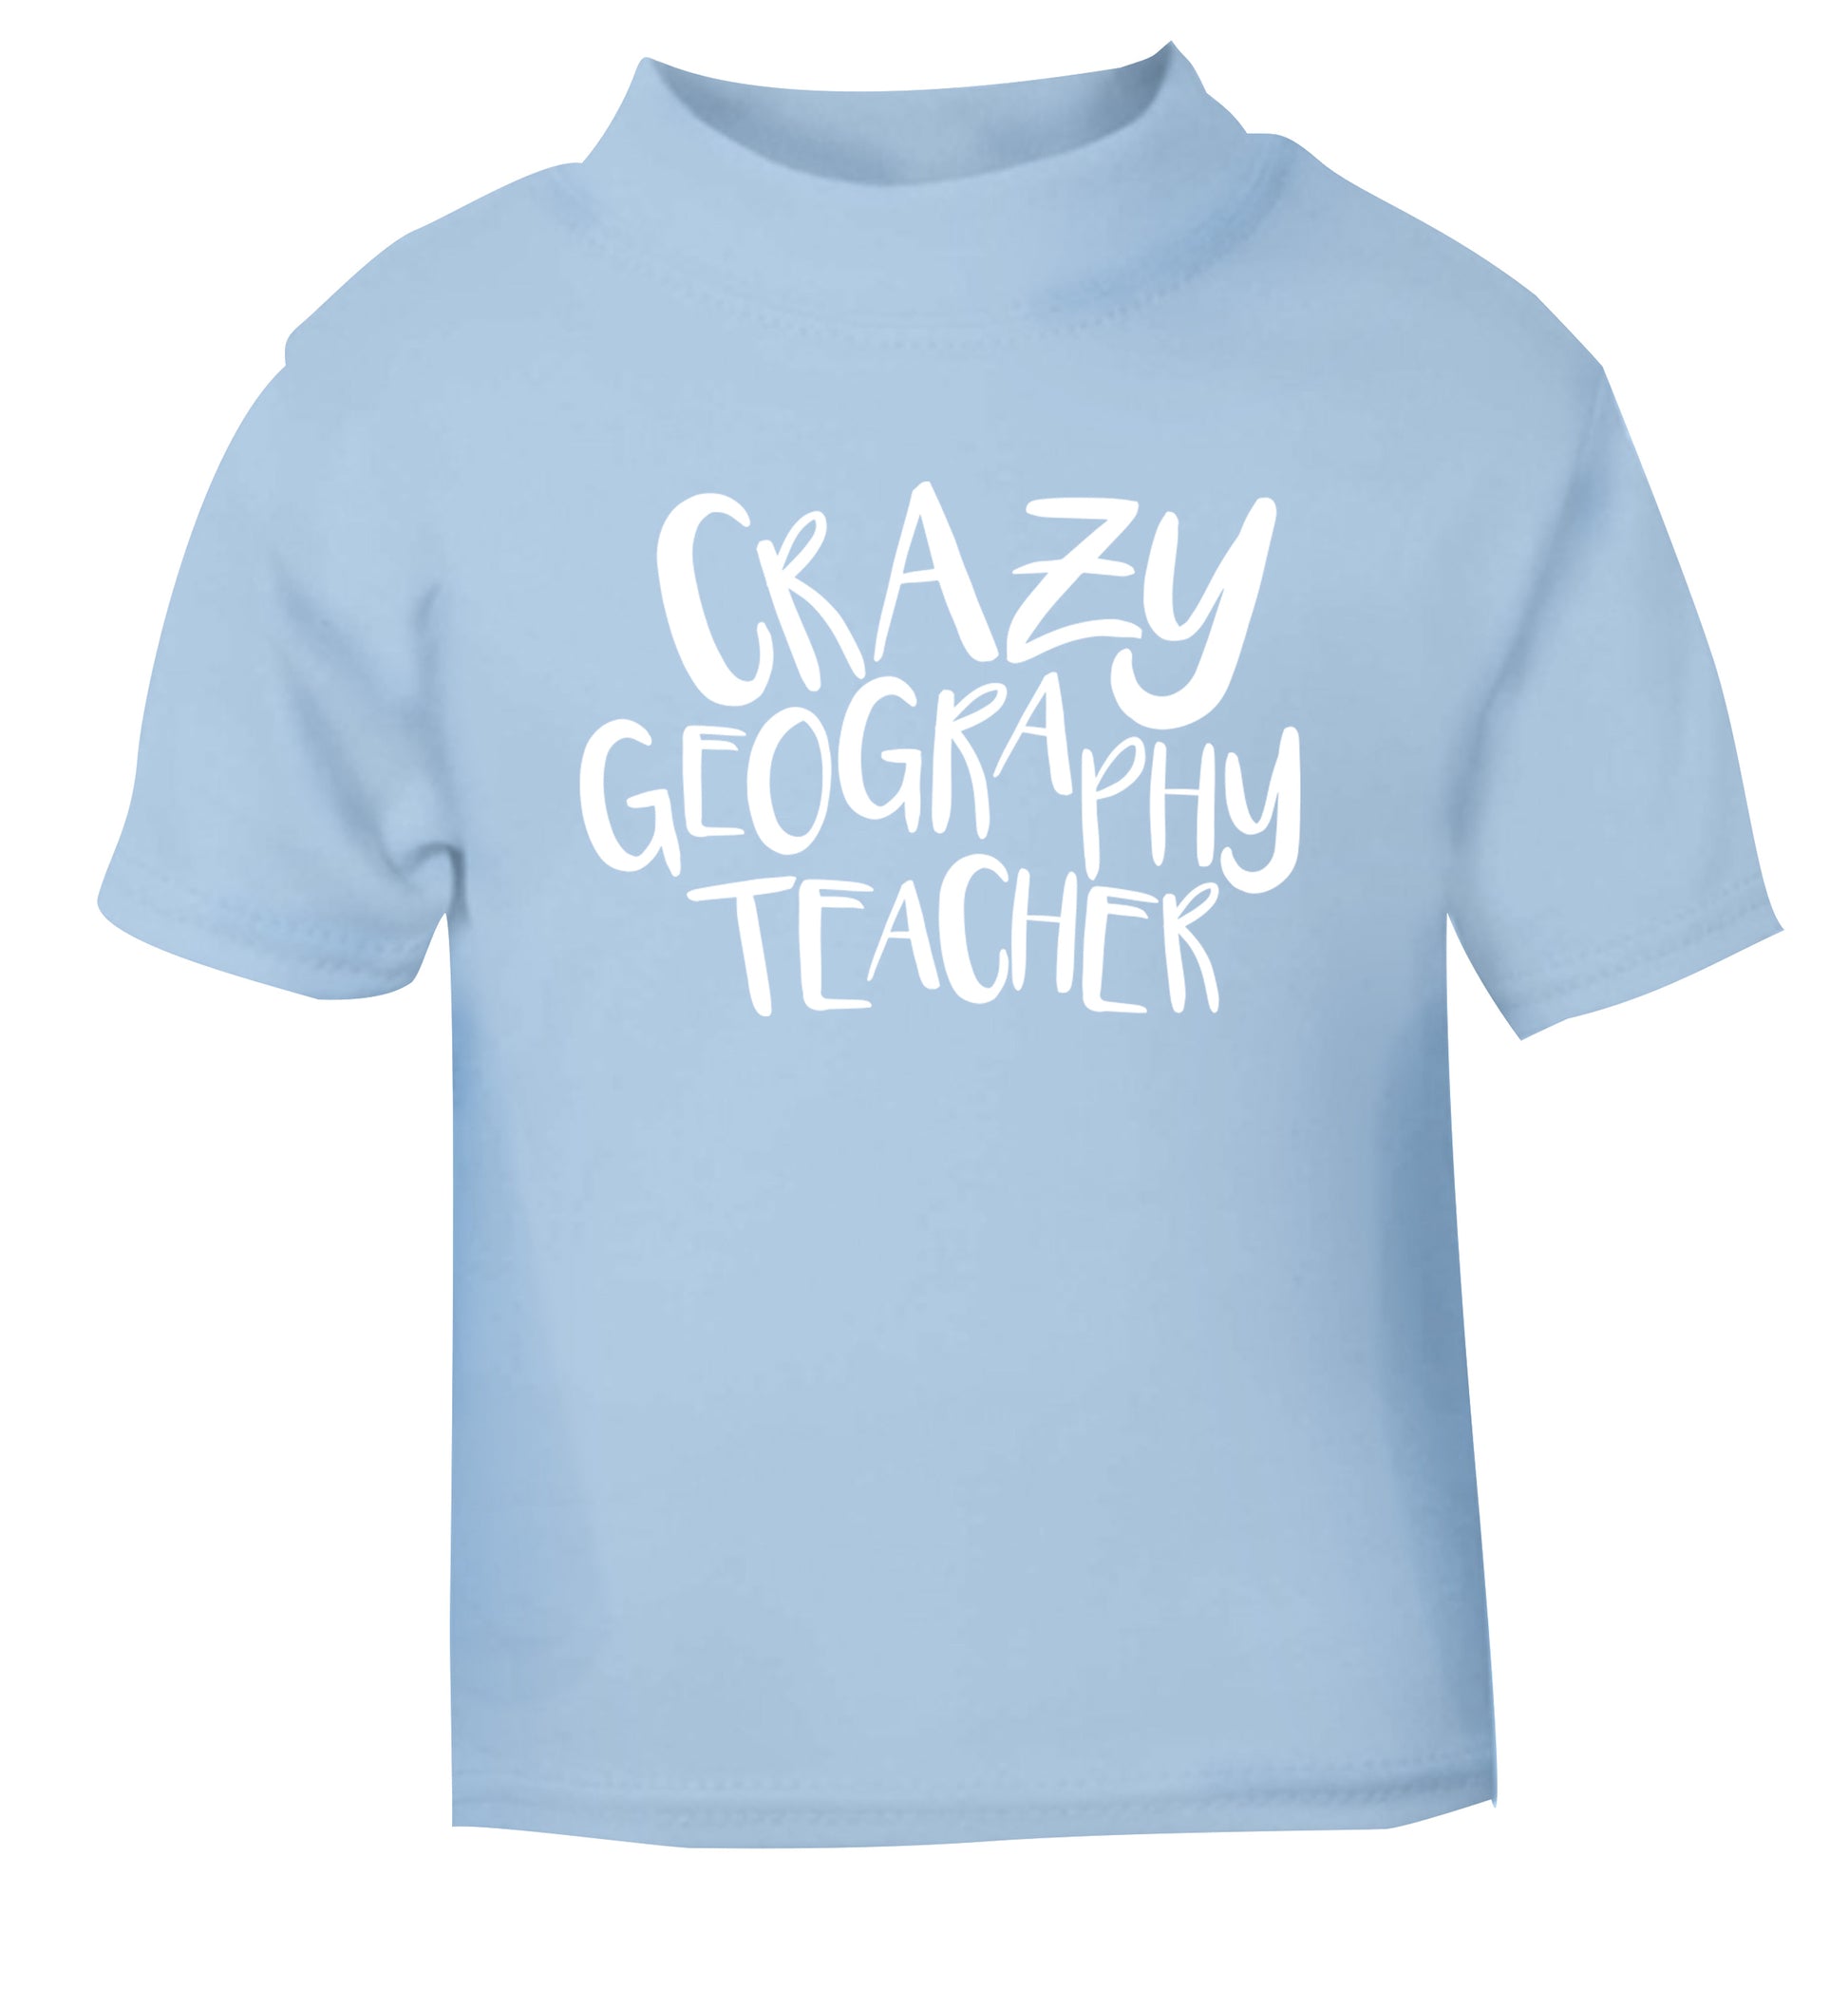 Crazy geography teacher light blue Baby Toddler Tshirt 2 Years